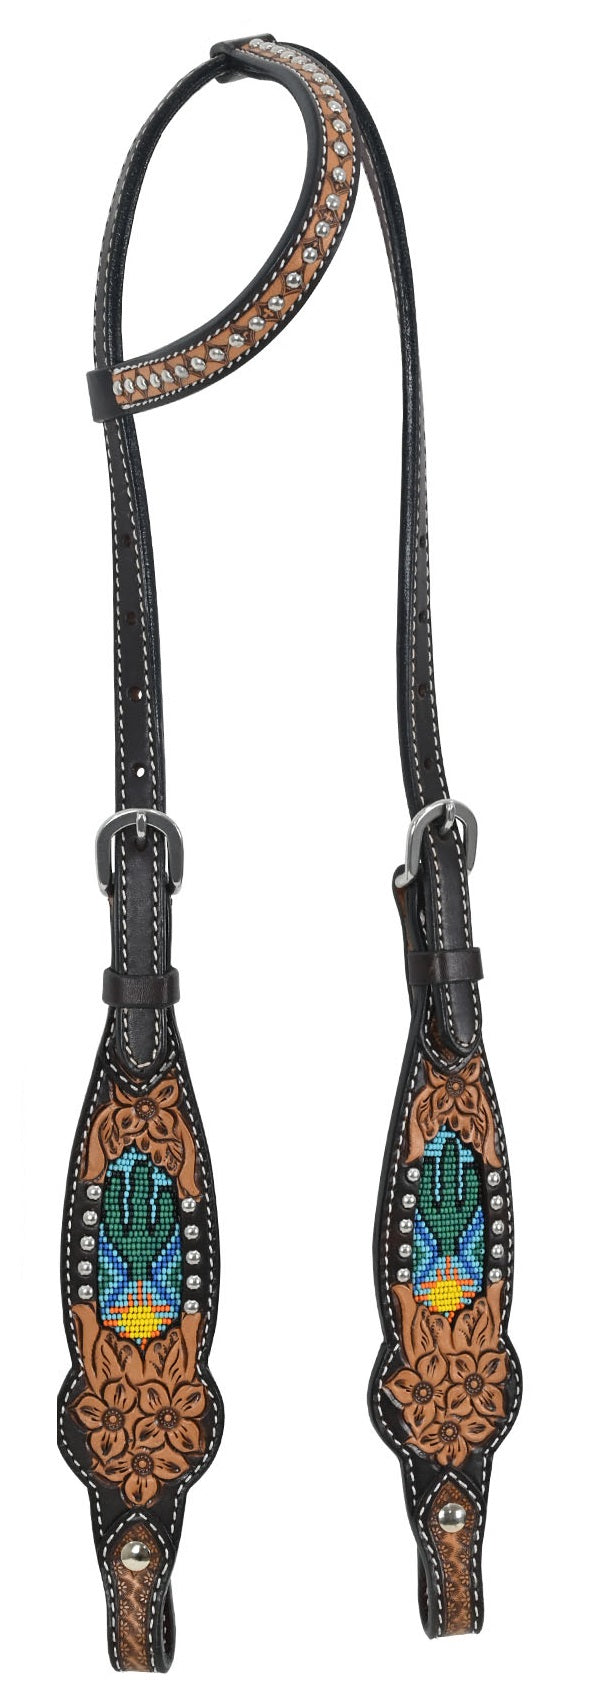 Rafter T Single Ear Headstall with Beaded Cactus Inlay